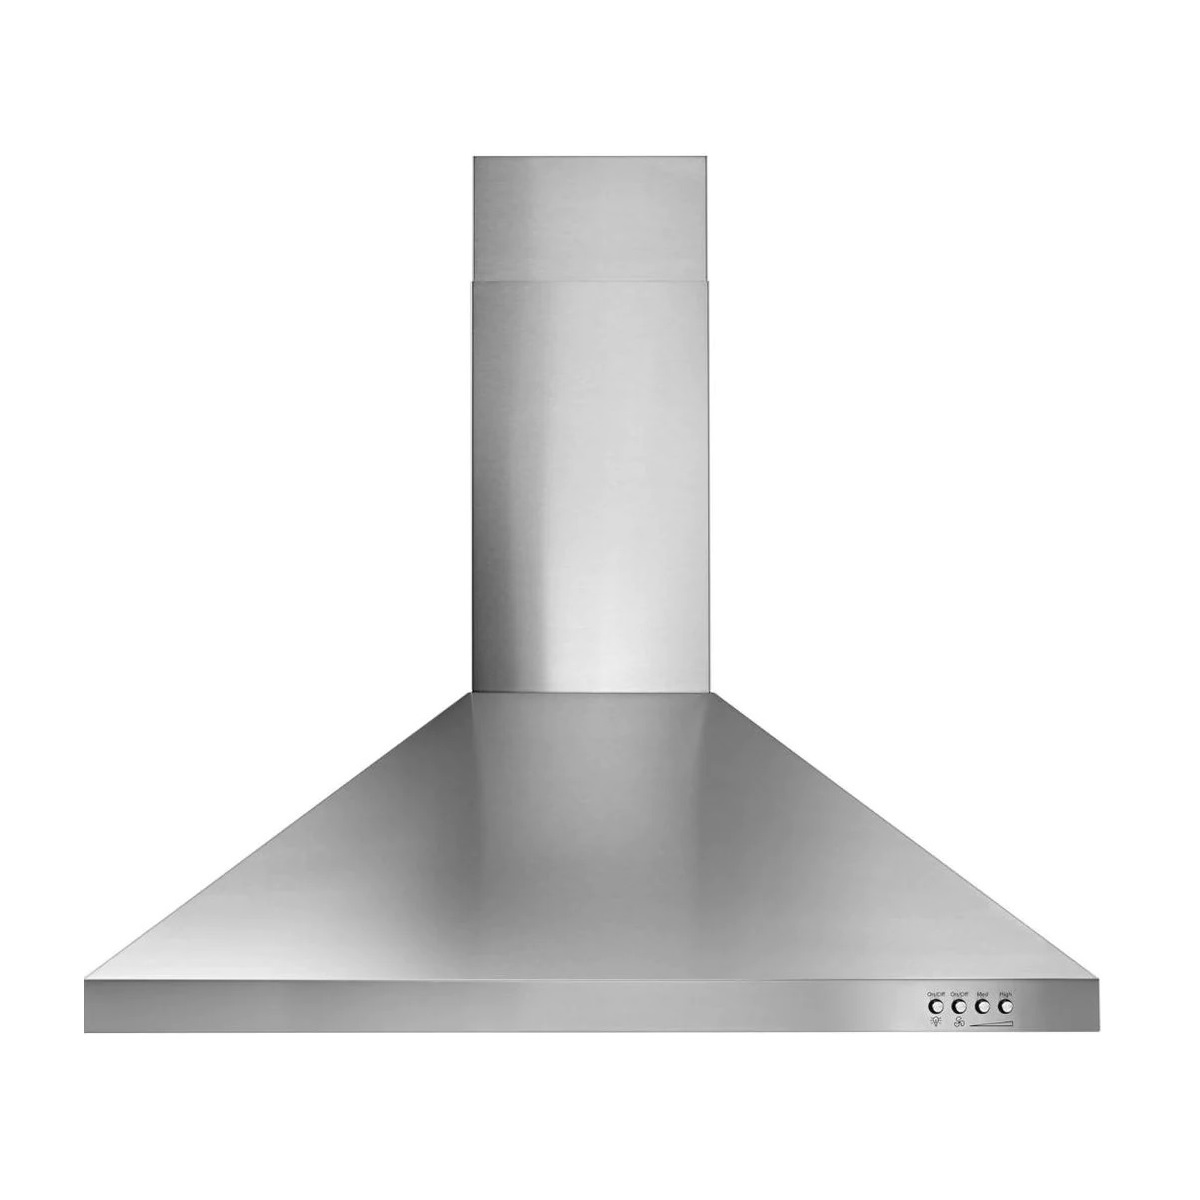 Locating the Model Number on a Range Hood